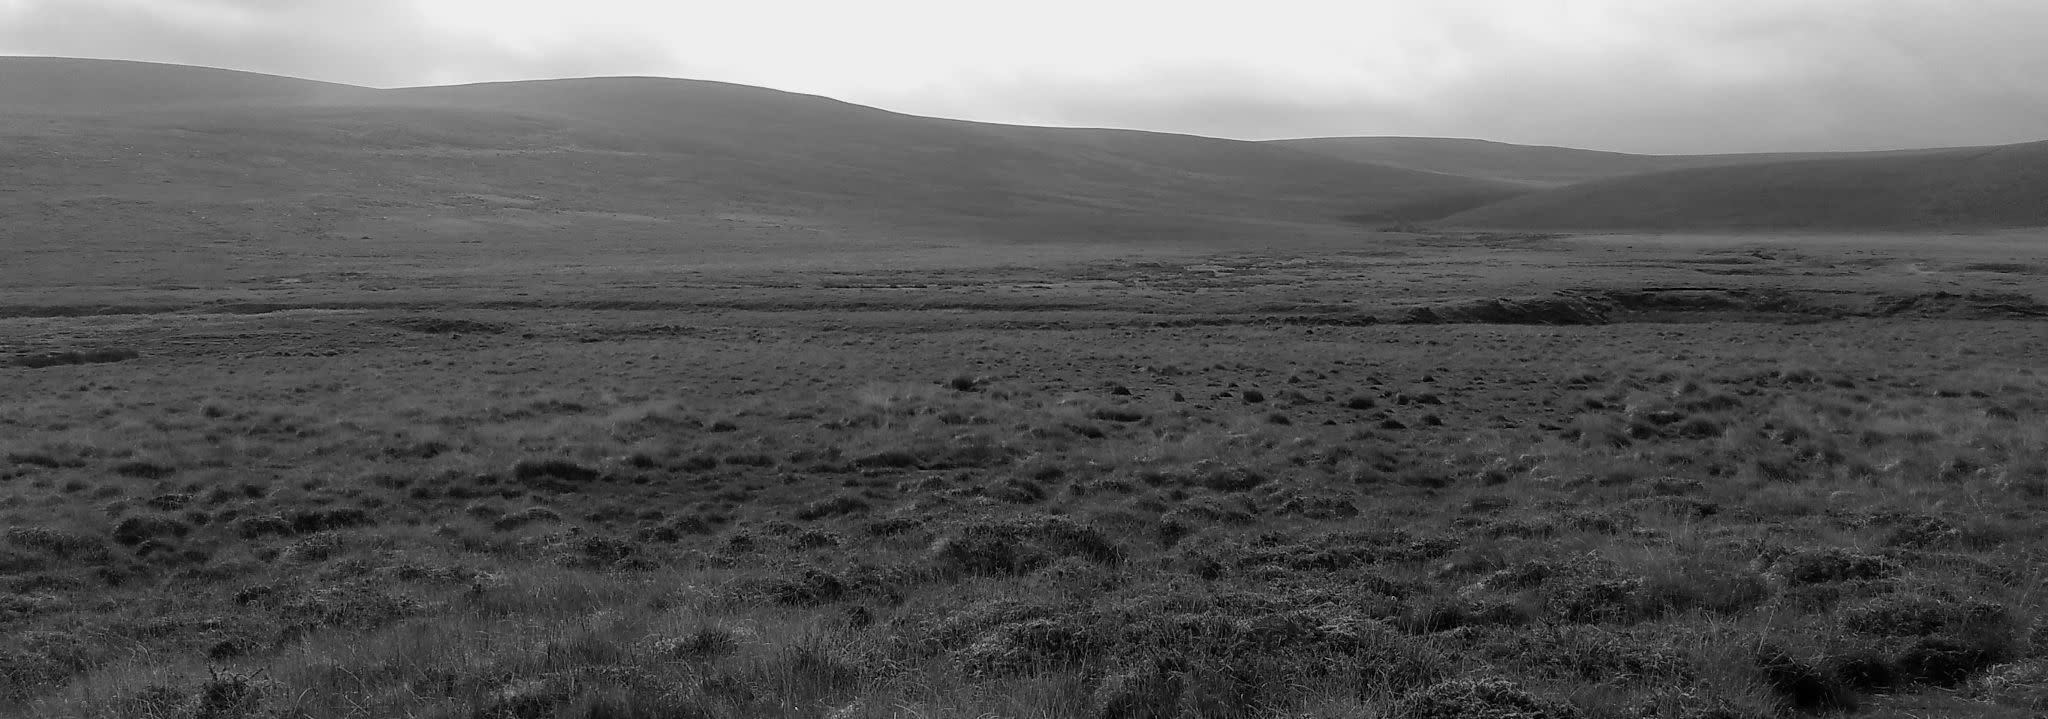 A black and white photo of Dartmoor